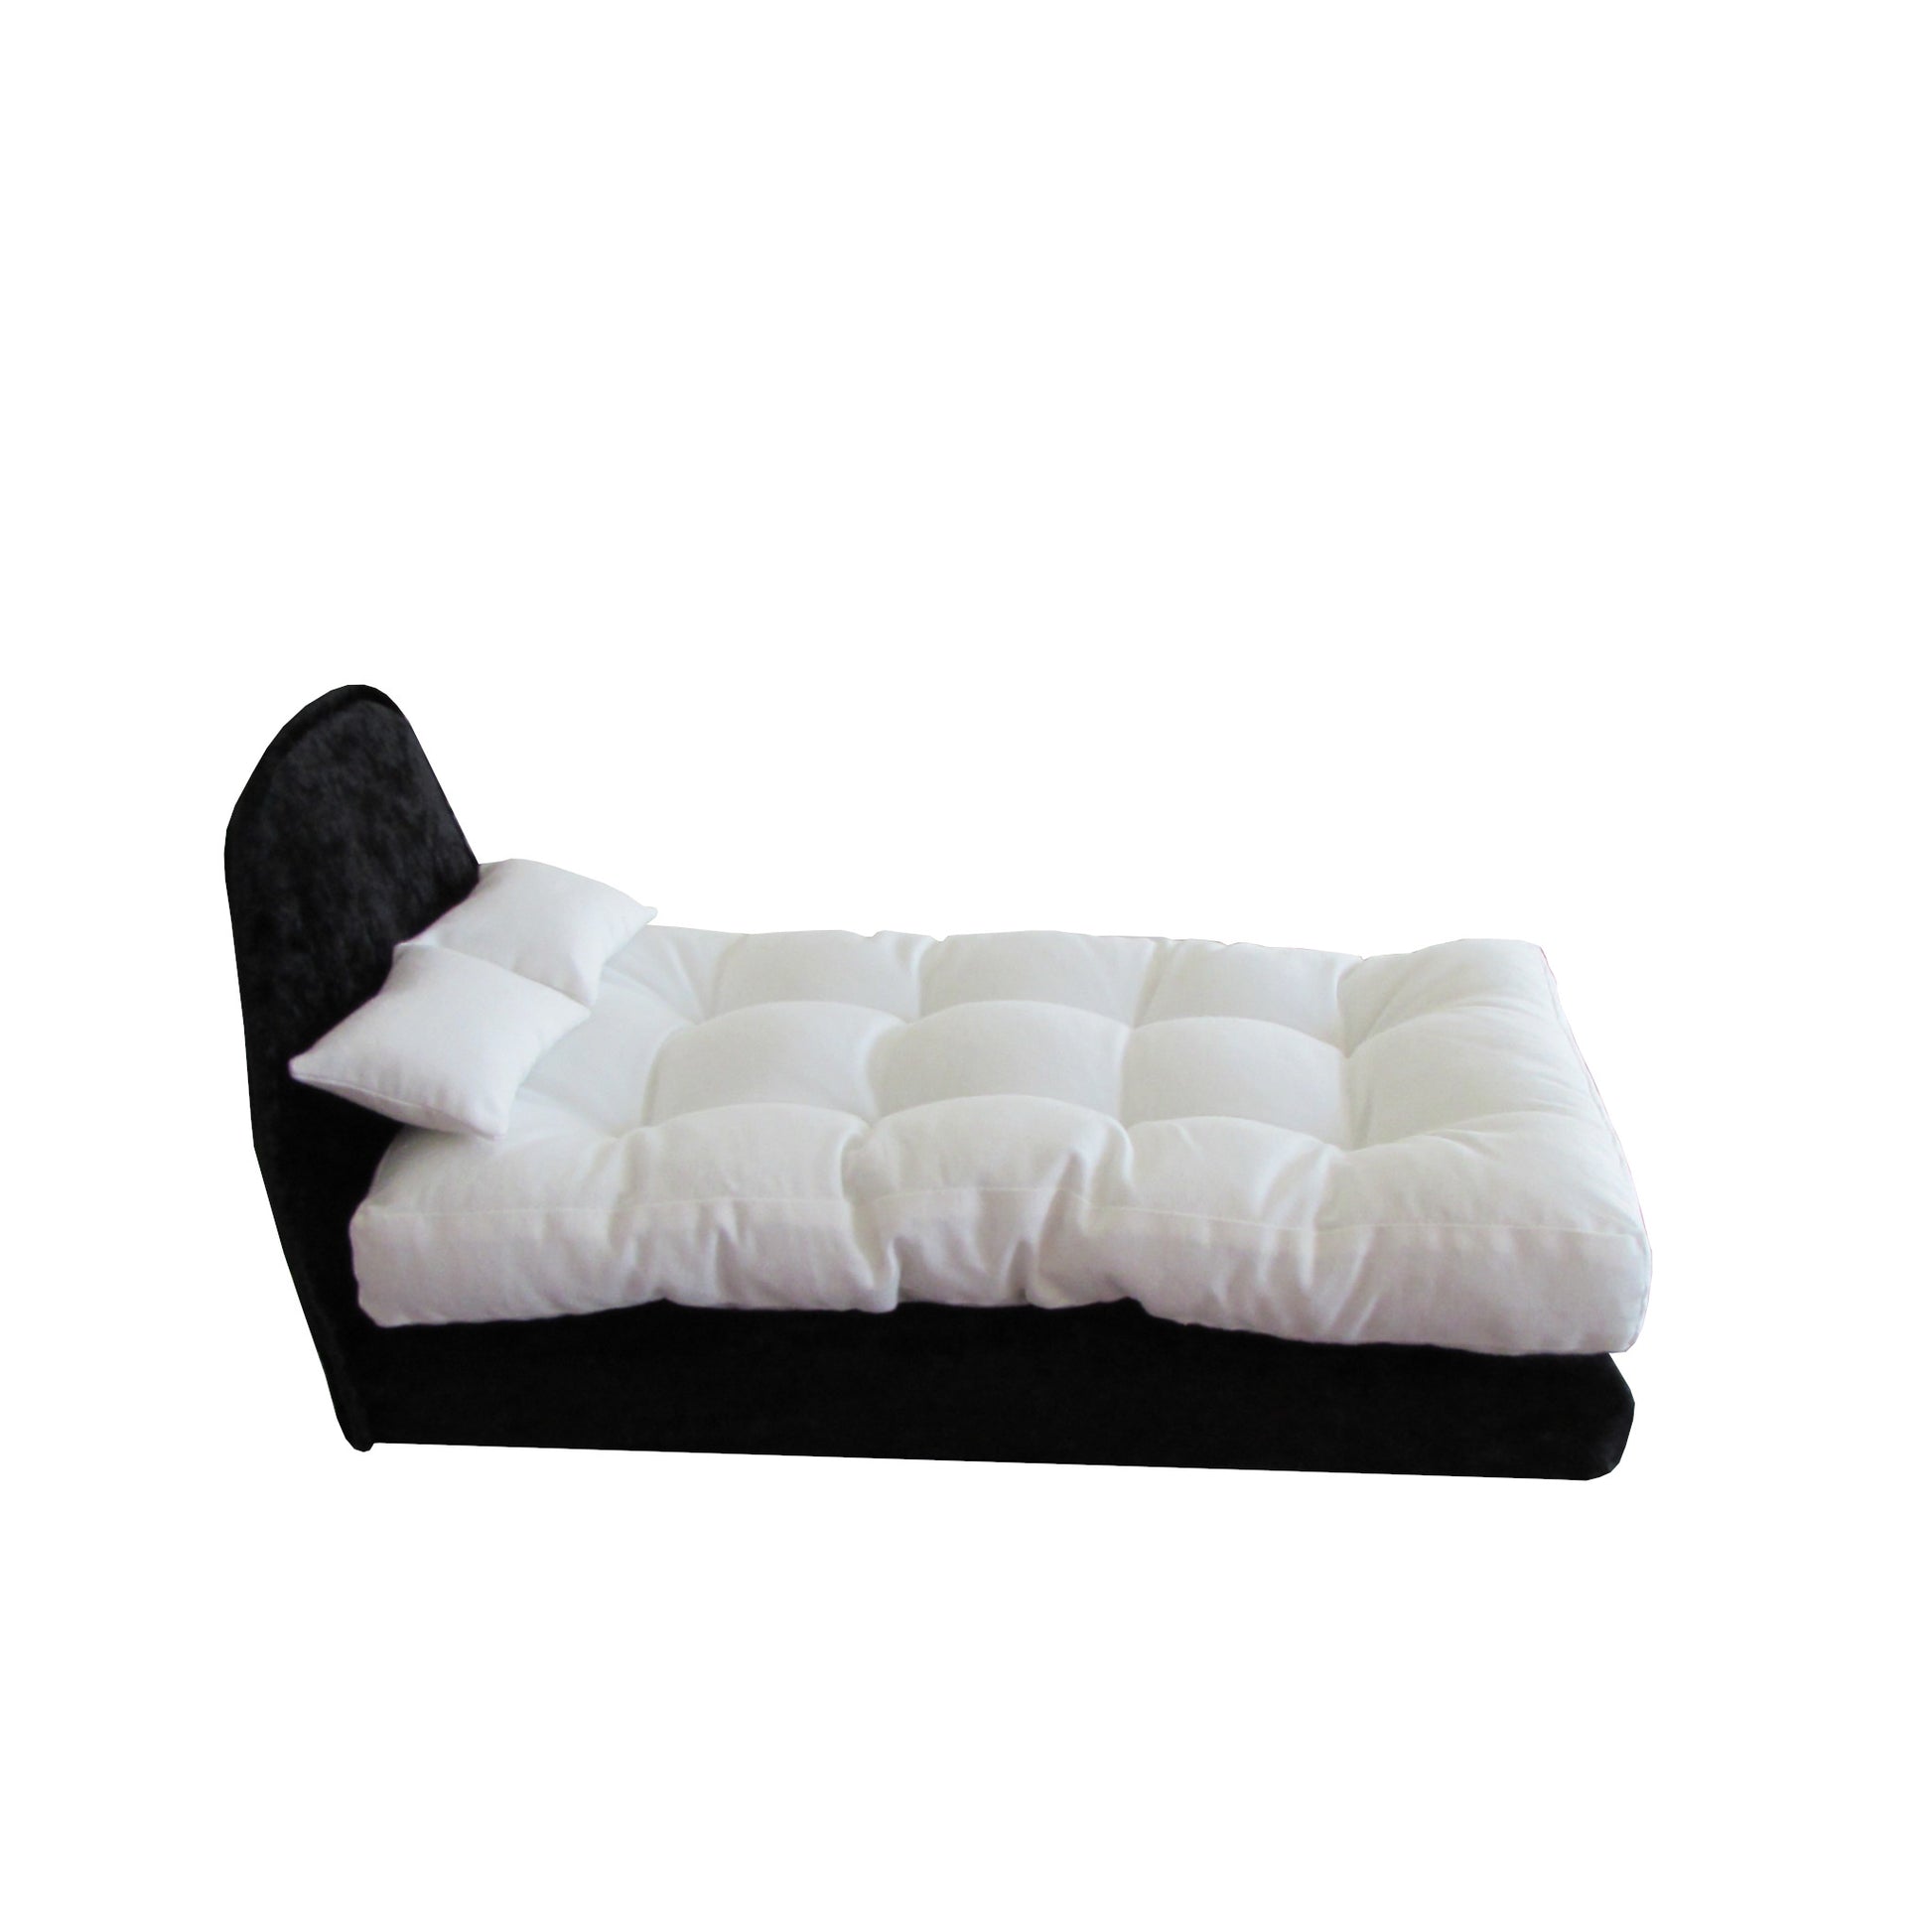 Black Crushed Velvet Double Doll Bed, Pillows, and Mattress for 11.5-inch and 12-inch dolls